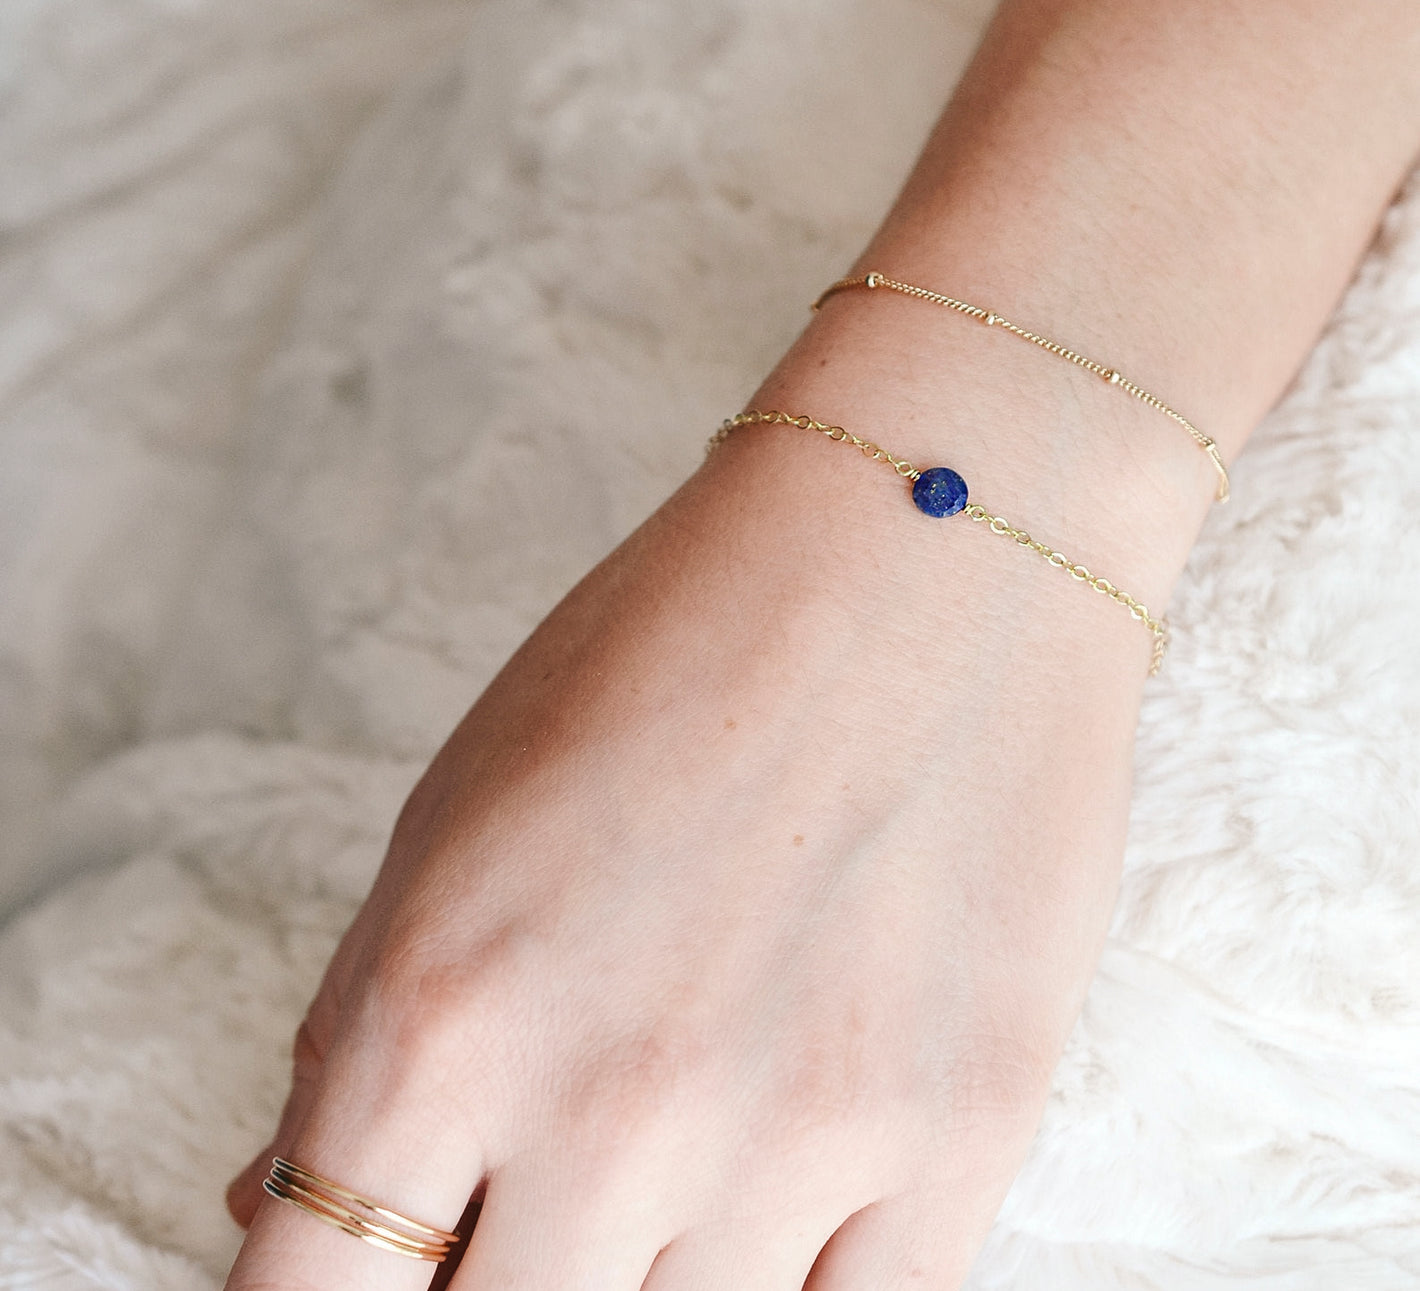 Dainty blue Lapis Lazuli coin bracelet on a sterling silver or gold filled chain.